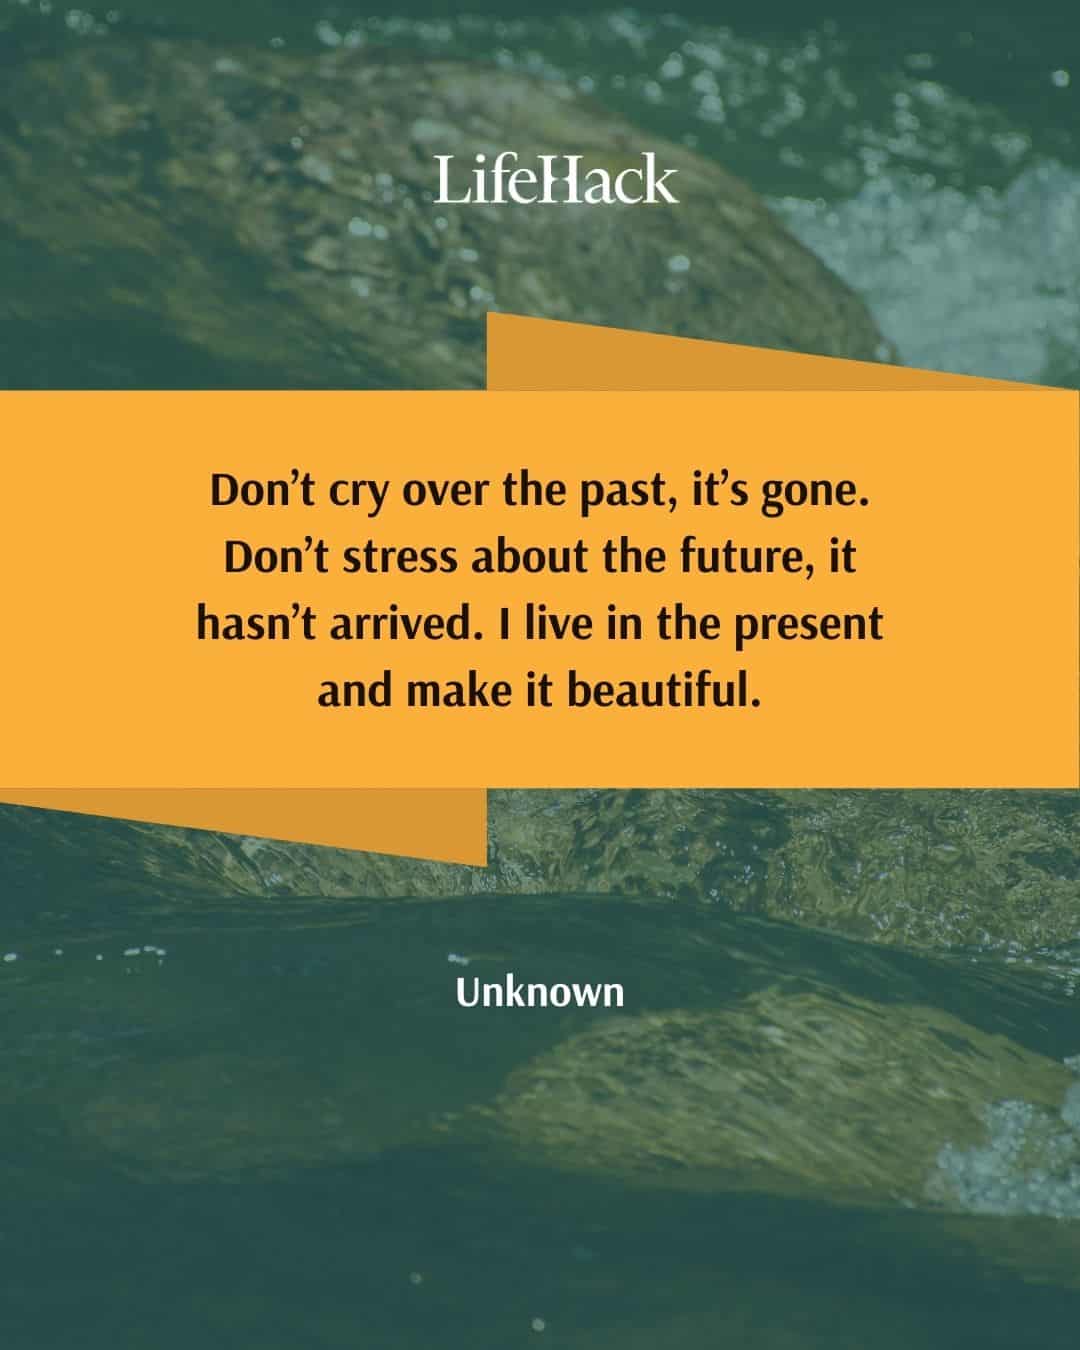 113 Famous Quotes About Life That Will Inspire You